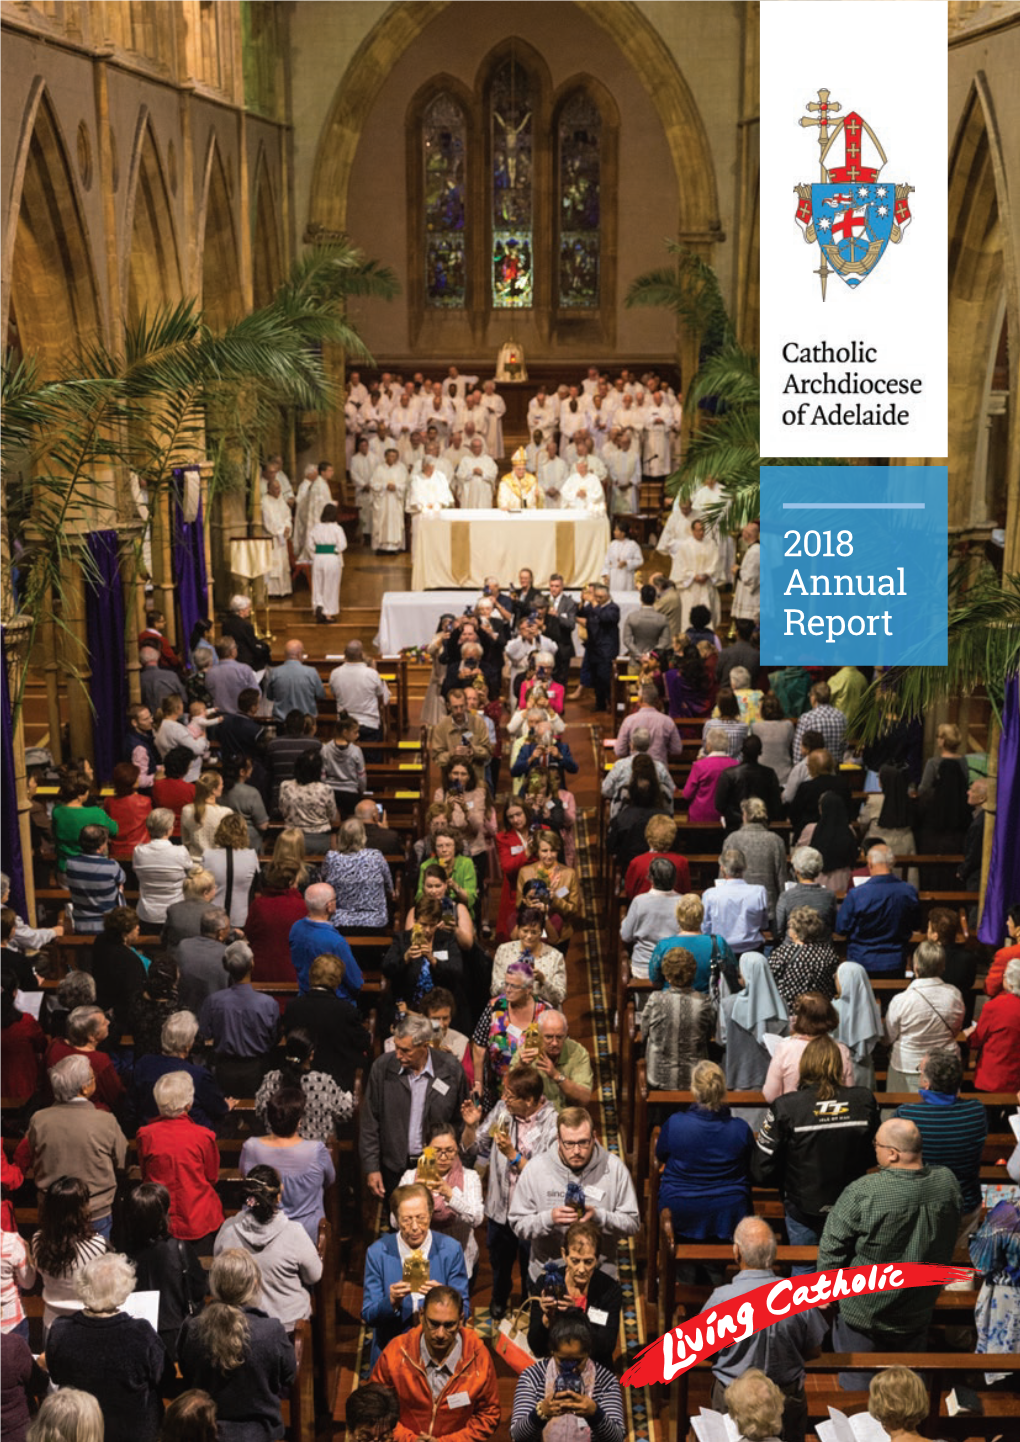 2018 Annual Report COVER IMAGE: the CHRISM MASS HELD in ST FRANCIS XAVIER’S CATHEDRAL DURING HOLY WEEK